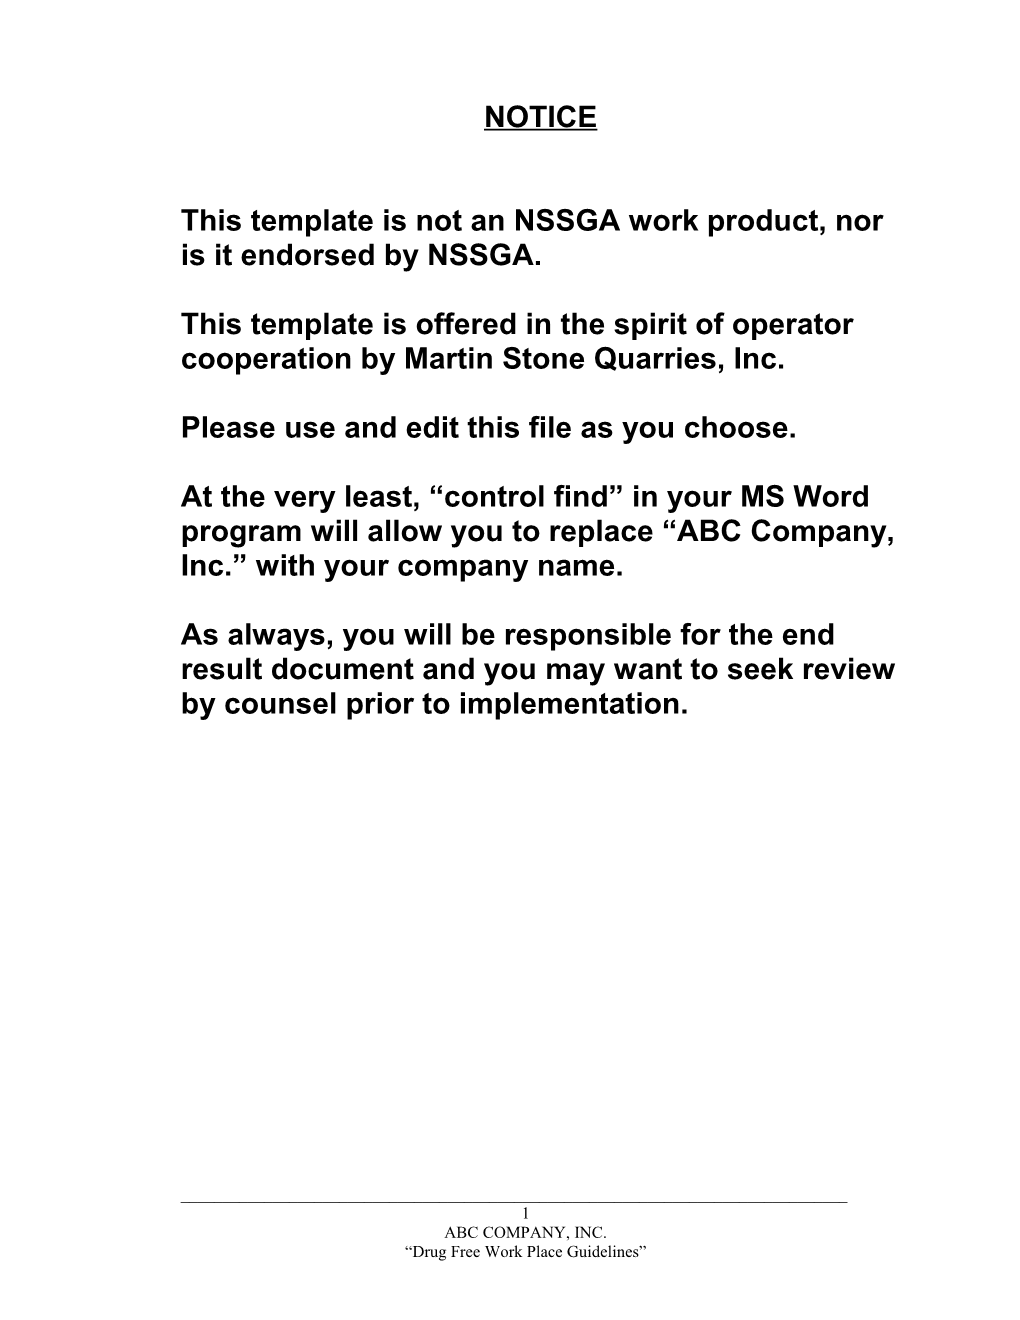 This Template Is Not an NSSGA Work Product, Nor Is It Endorsed by NSSGA